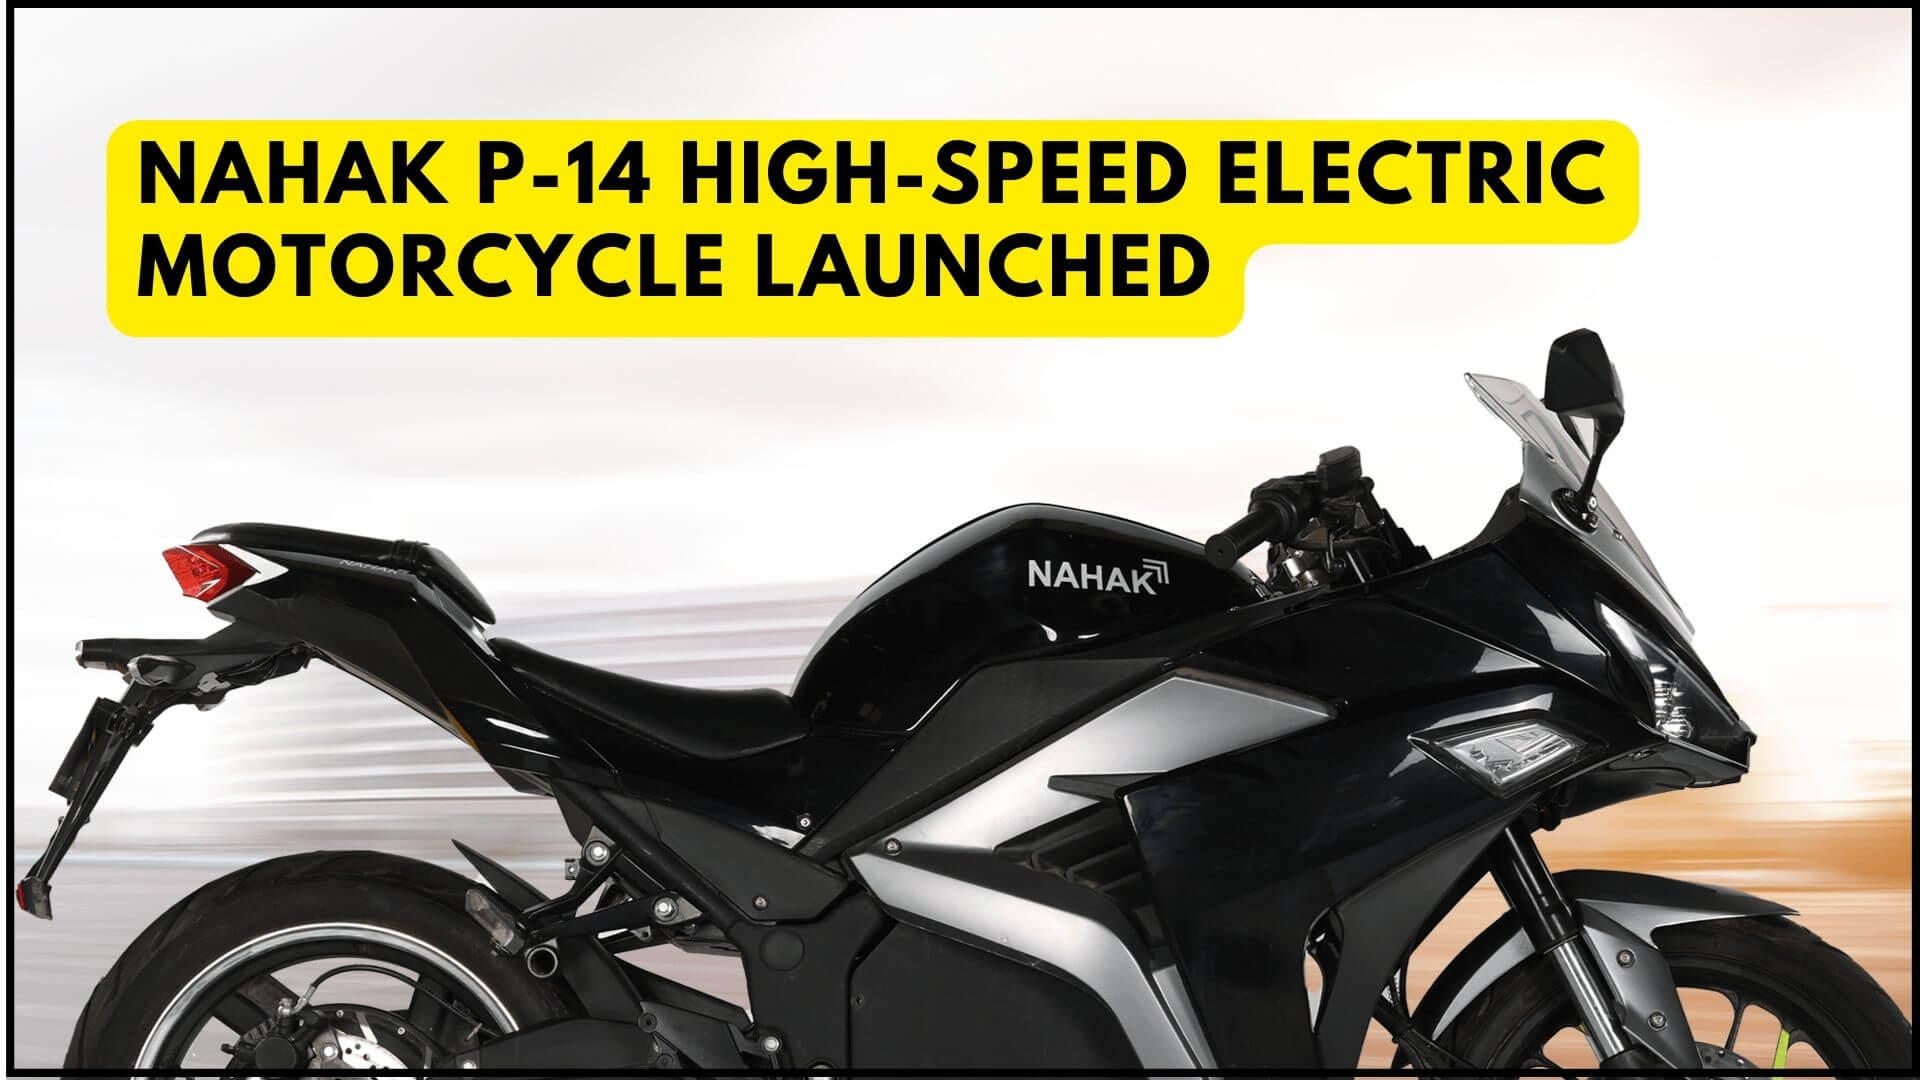 https://e-vehicleinfo.com/nahak-p-14-electric-motorcycle-launched-priced-at-rs-2-50-lakh/